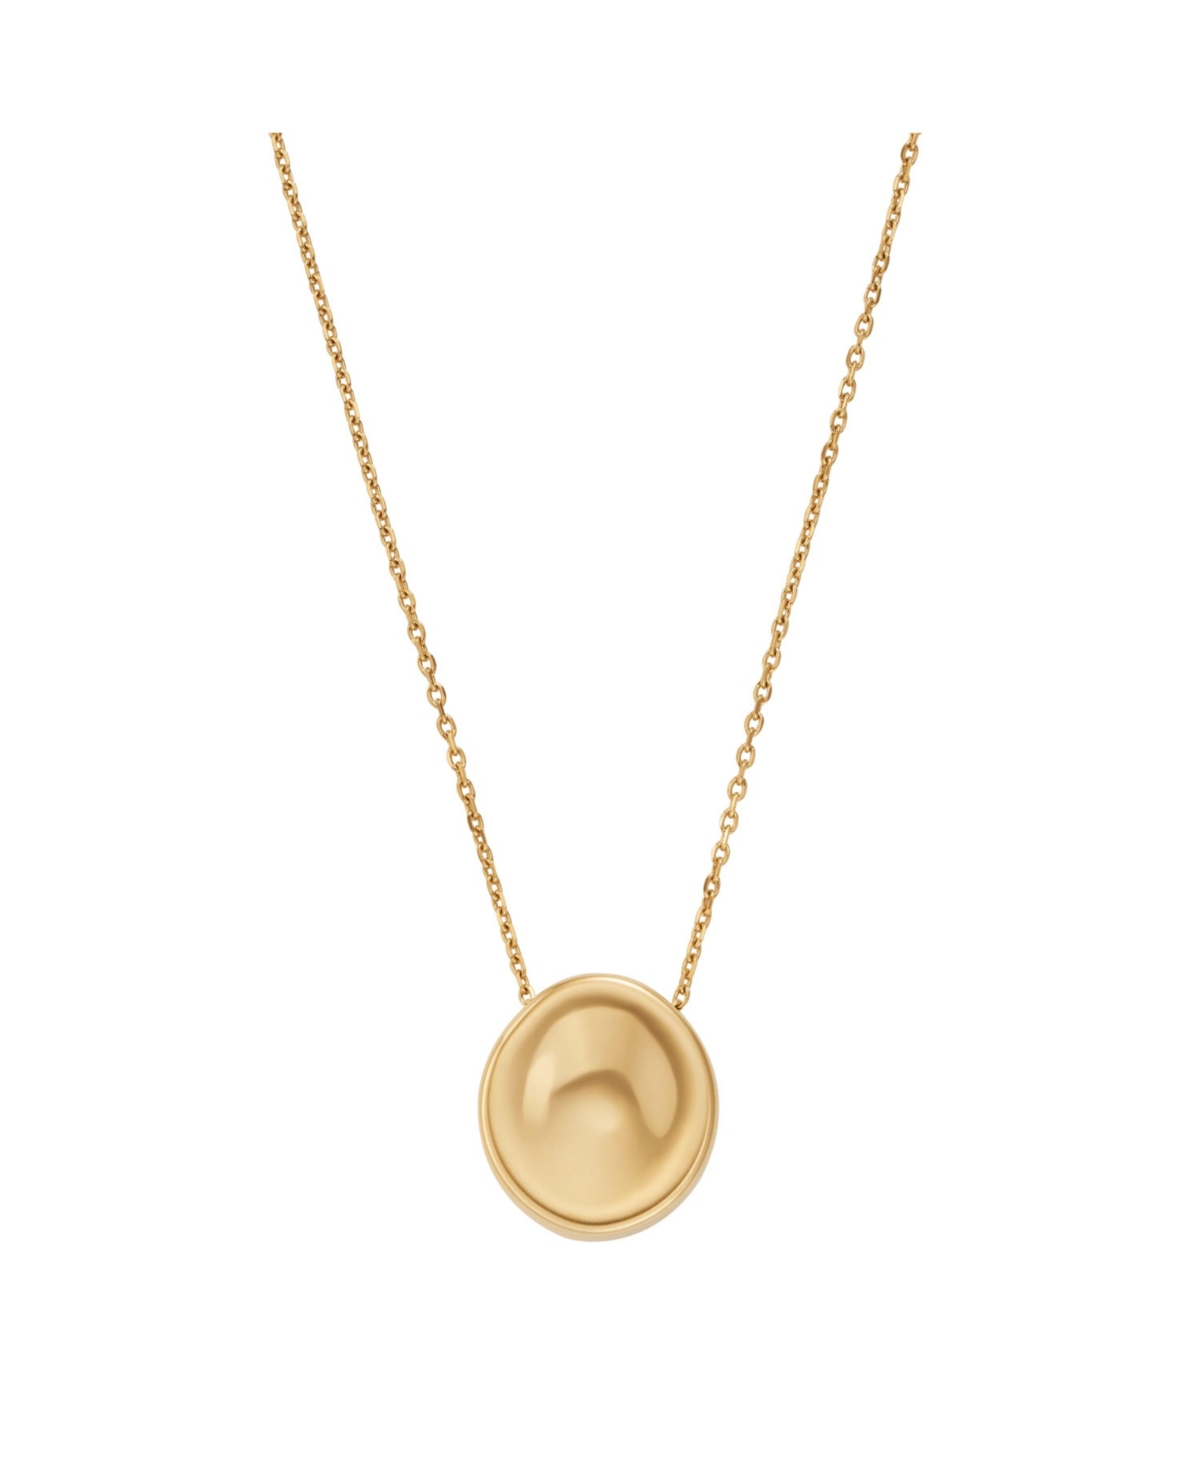 Women's Anja Pebble Gold-Tone Stainless Steel Pendant Necklace, SKJ1750710 - Gold